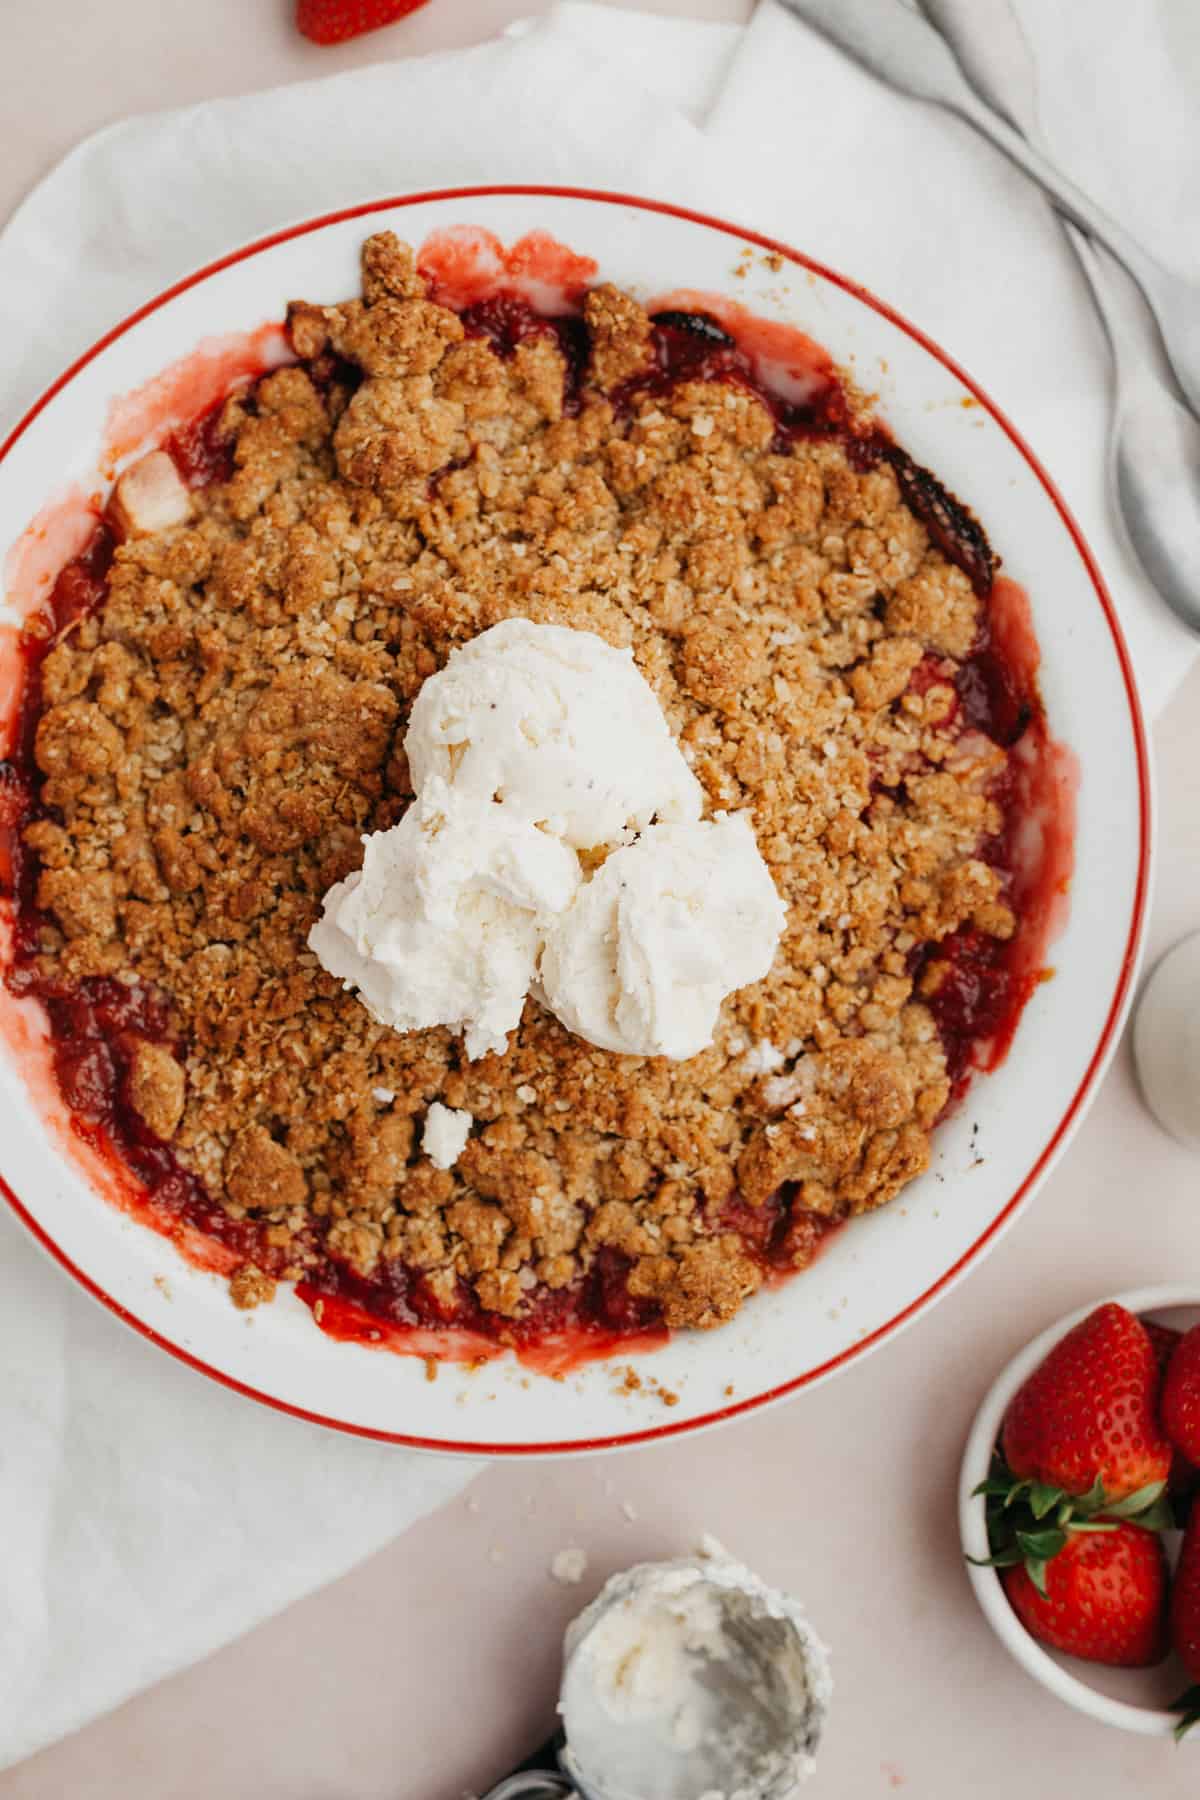 Strawberry and apple crisp in a white pie dish with several scoops of vanilla ice cream in the middle.